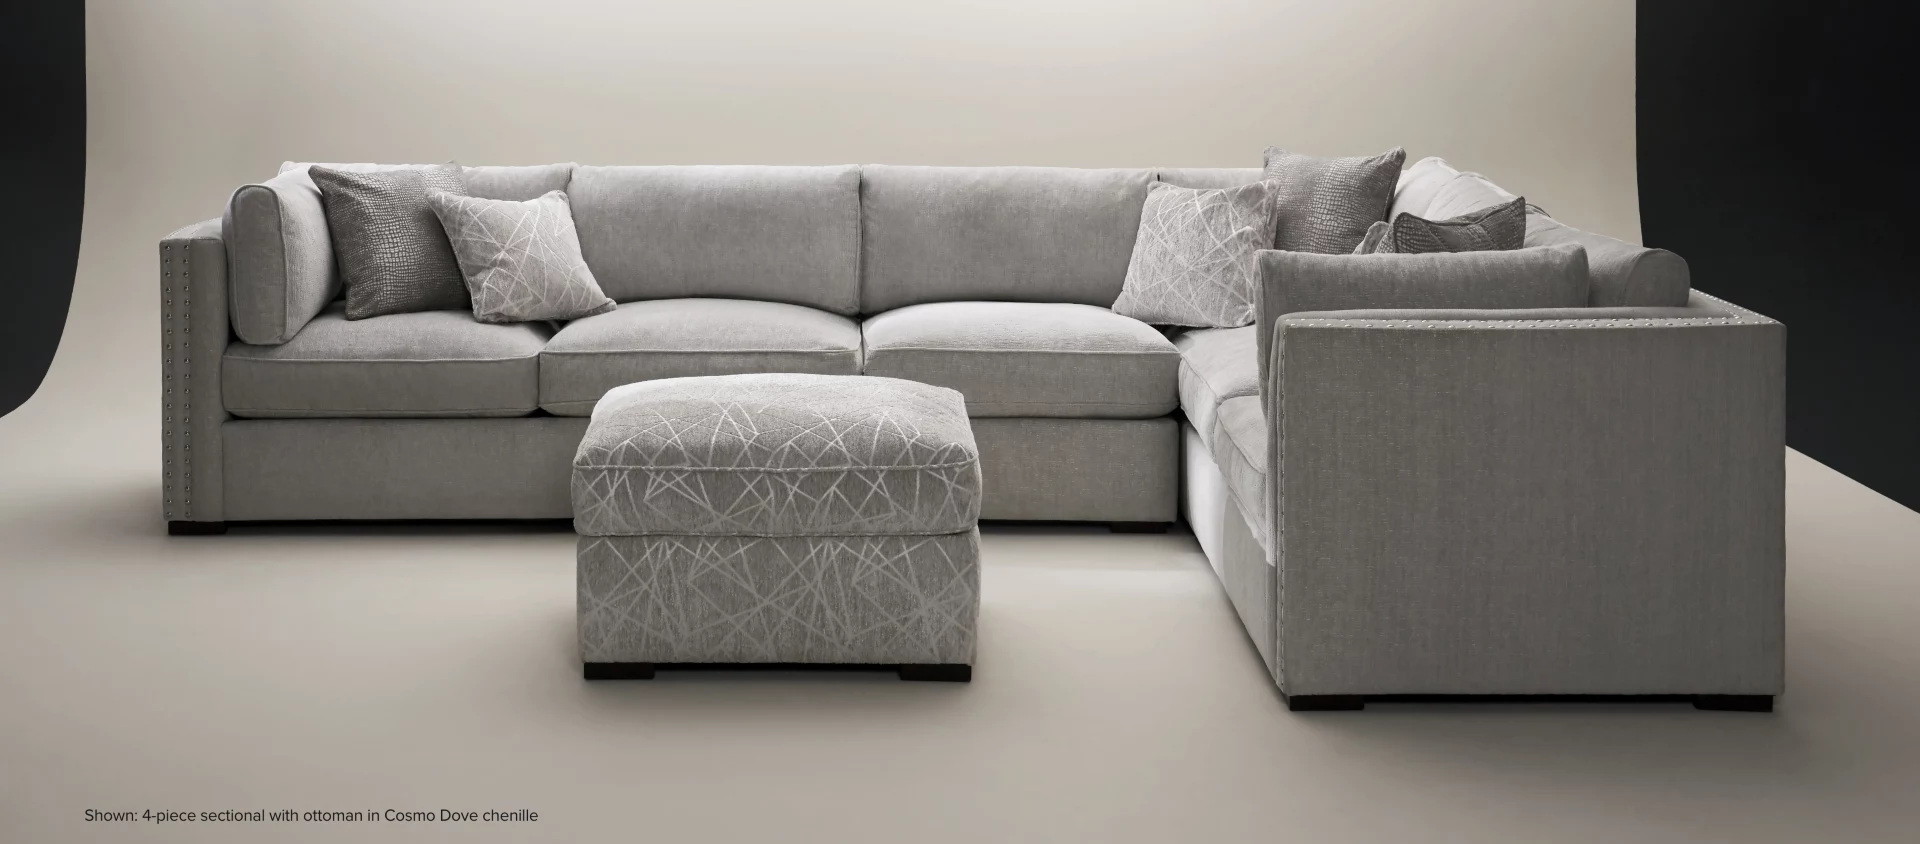 Abington 4-piece sectional with ottoman in cosmo dove chenille